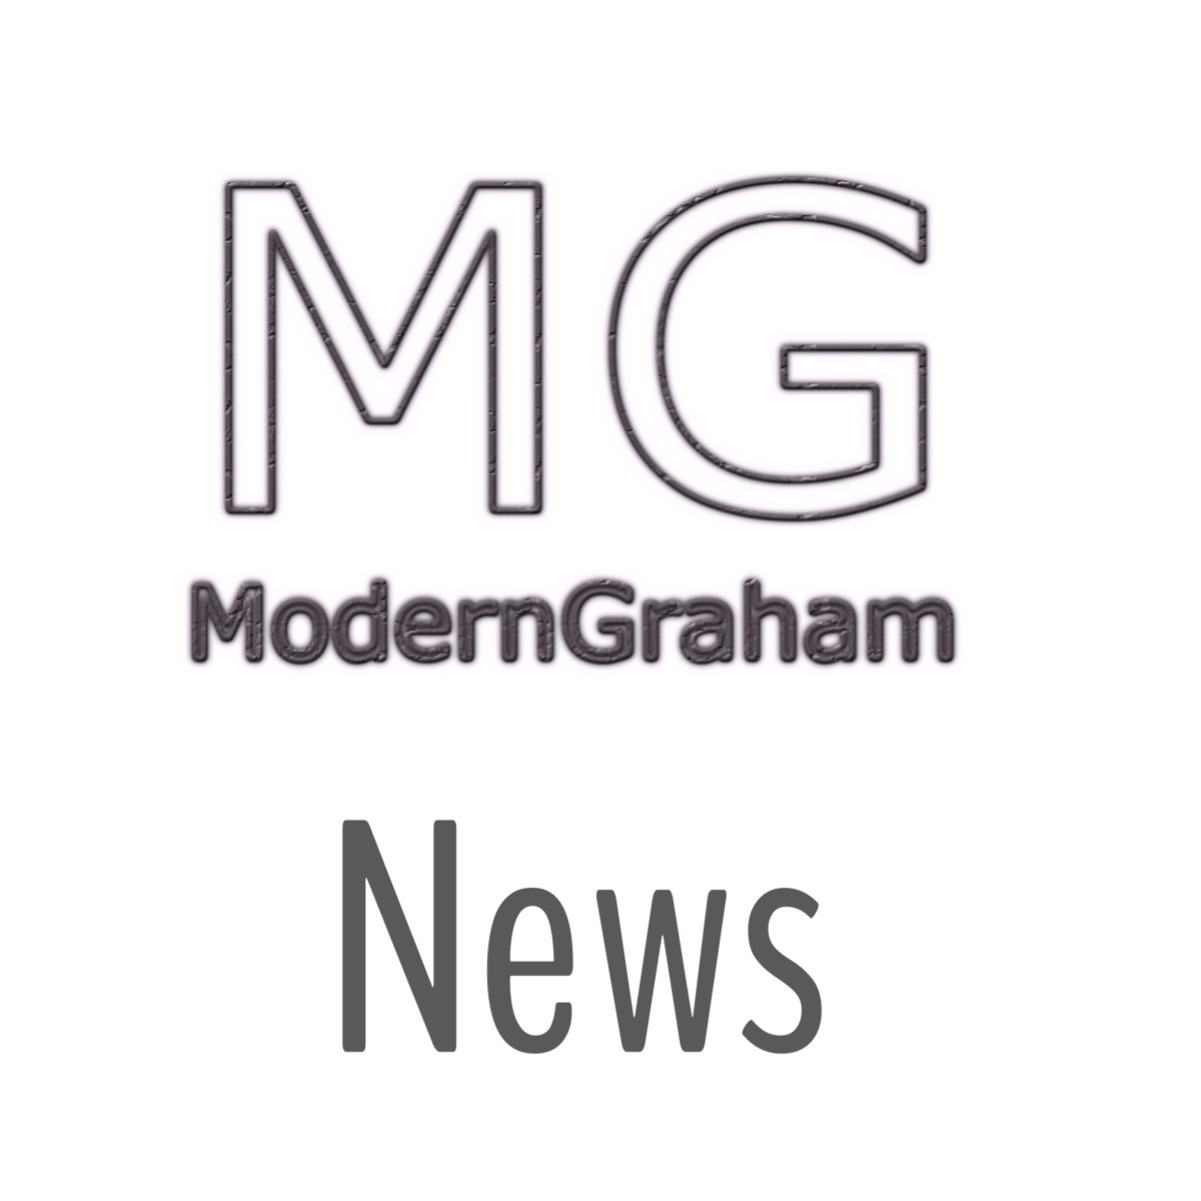 ModernGraham Announcements, News, and Feedback Survey